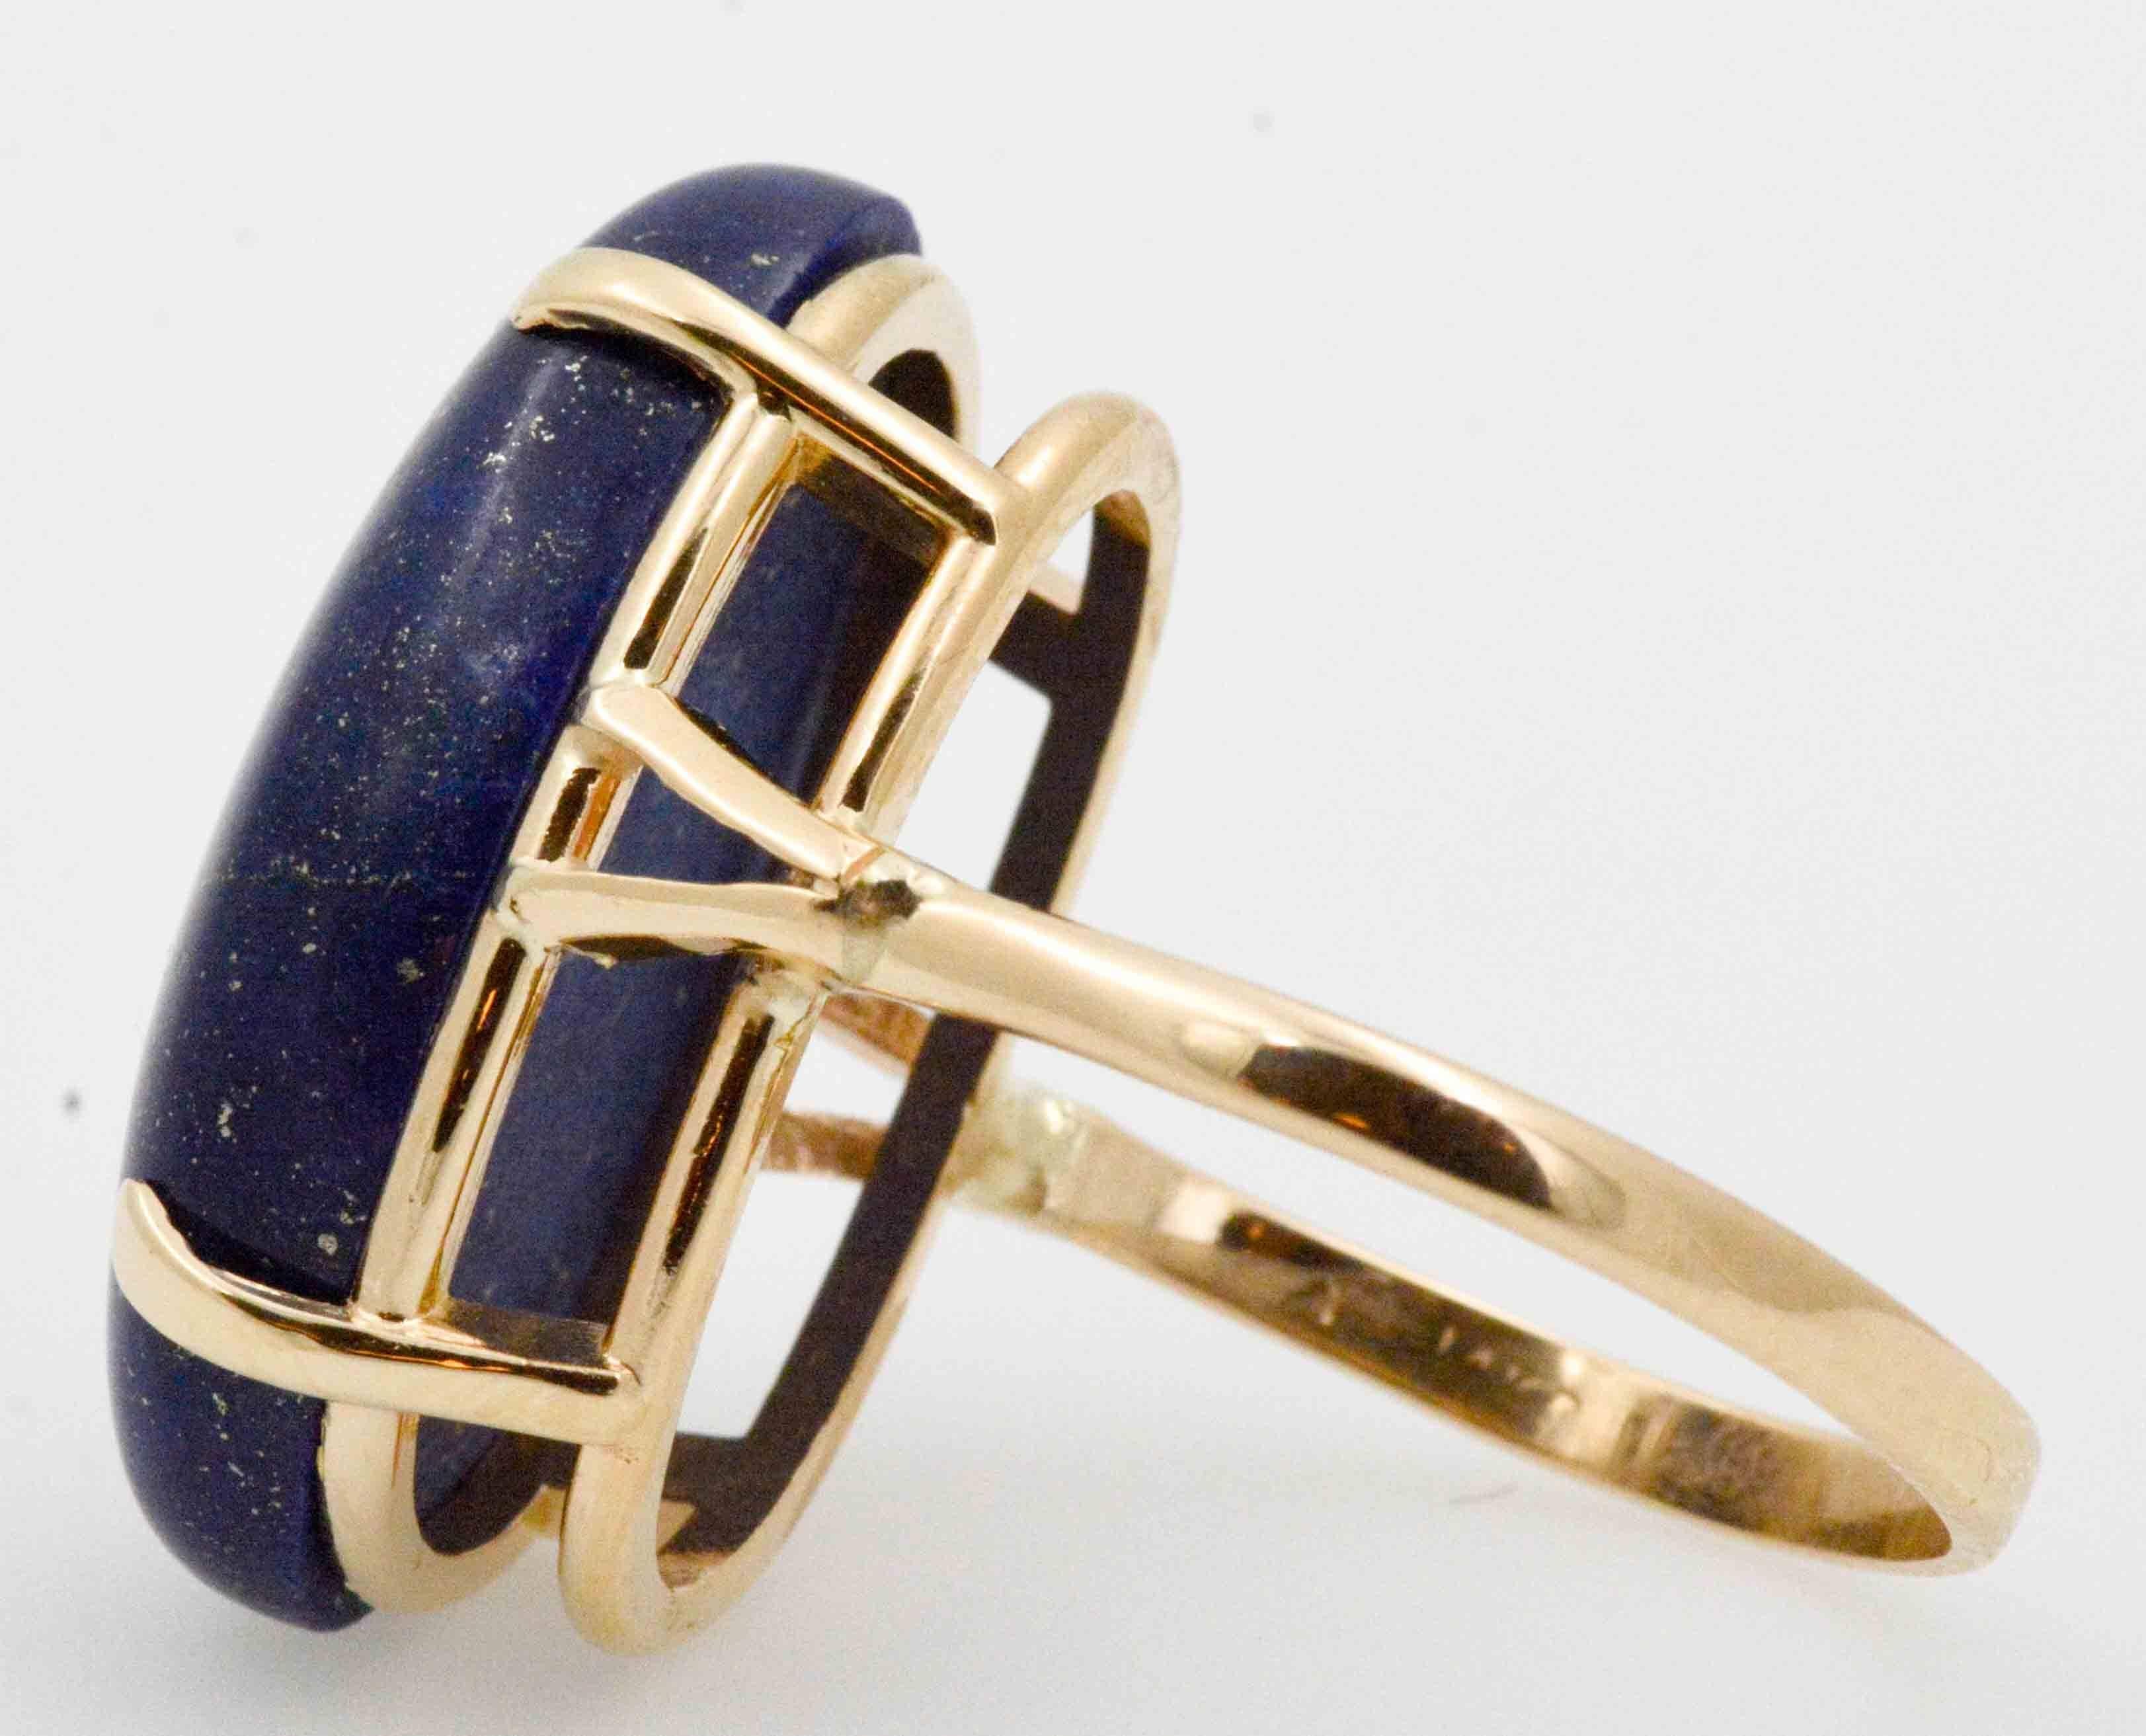 Like a starry evening sky, perfect little speckles dot this deep blue oval Lapis Lazuli. The 14 karat yellow gold ring complements the golden spangled 15.75 carat Lapis Lazuli. Currently a finger size 8, this ring may be sized as necessary, and has